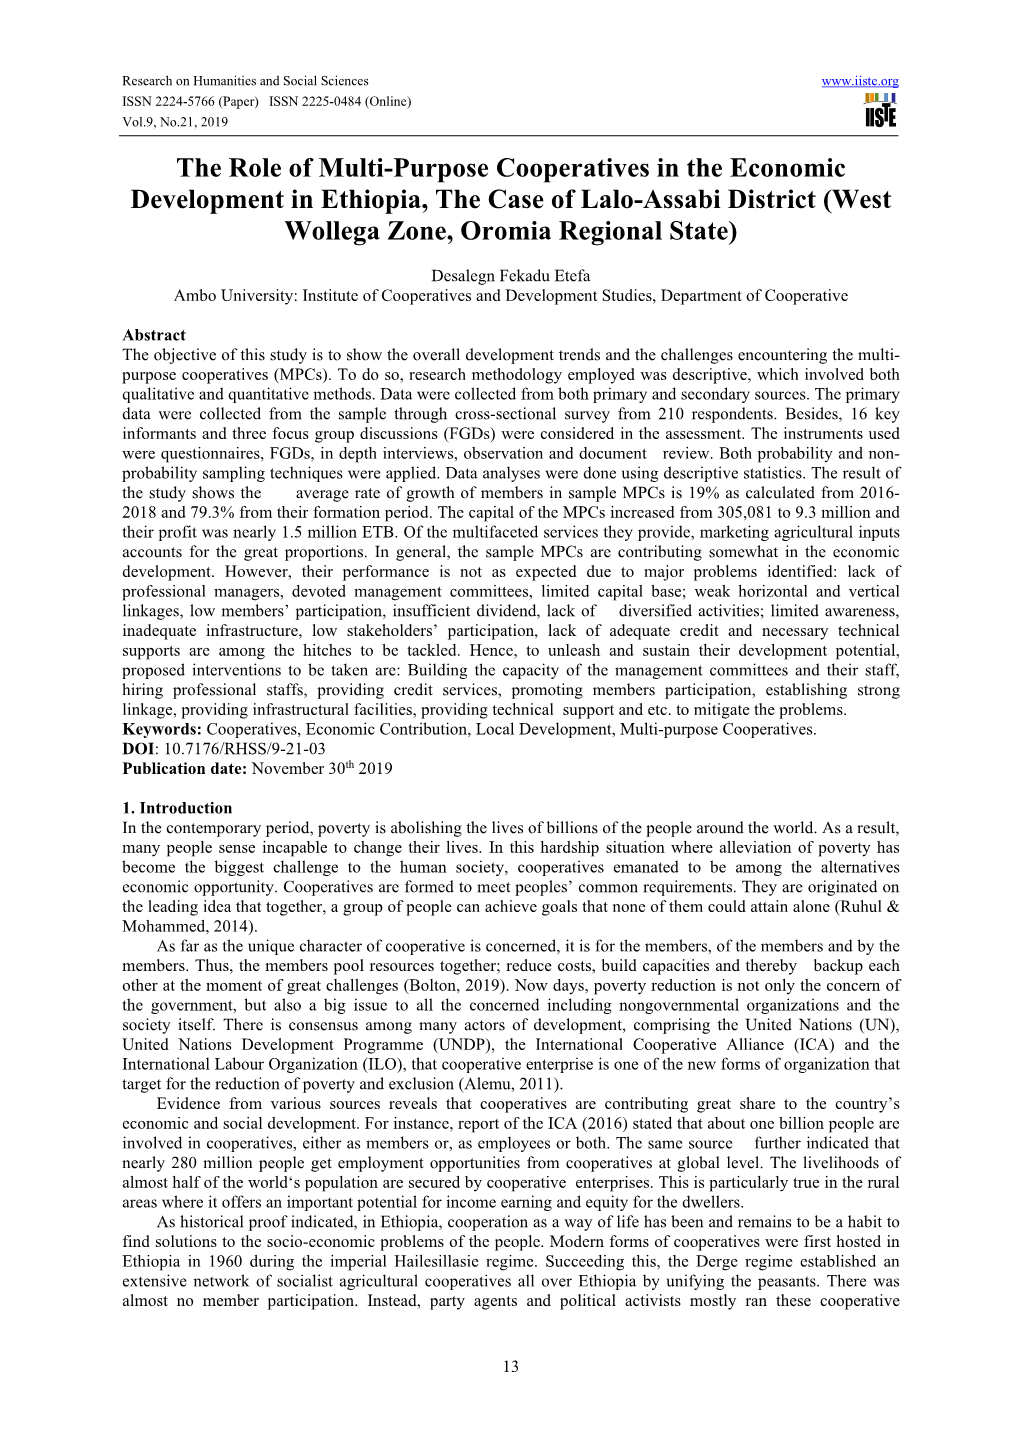 The Role of Multi-Purpose Cooperatives in the Economic Development in Ethiopia, the Case of Lalo-Assabi District (West Wollega Zone, Oromia Regional State)